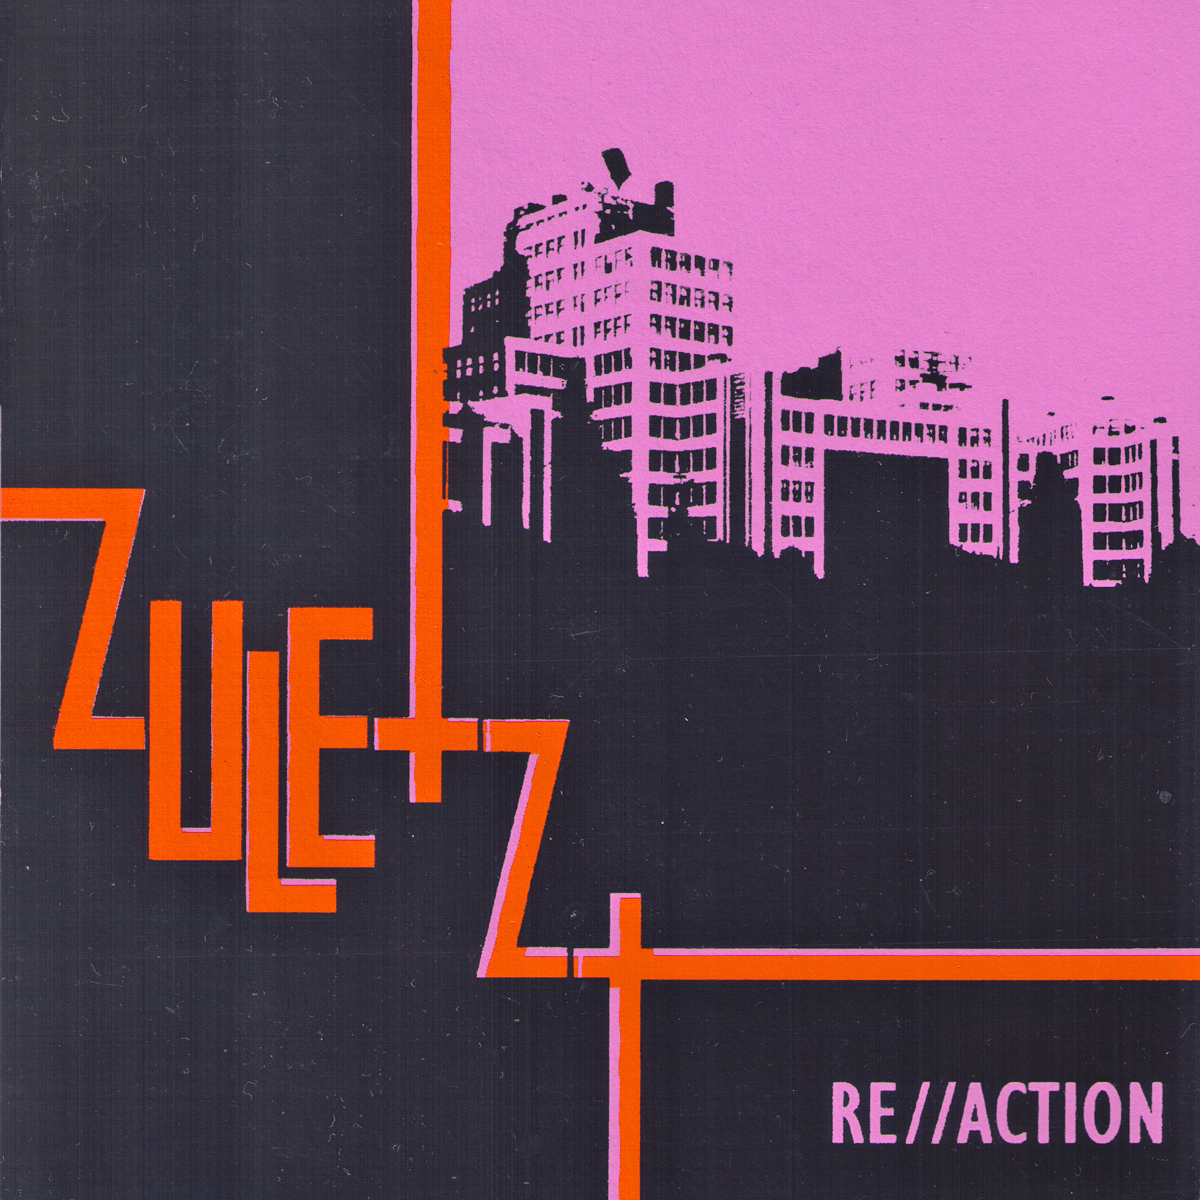 Zuletzt- Re//Action 7" ~RARE ORANGE BAND NAME CVR LIMITED TO 50 / EX MISCLACULATIONS!